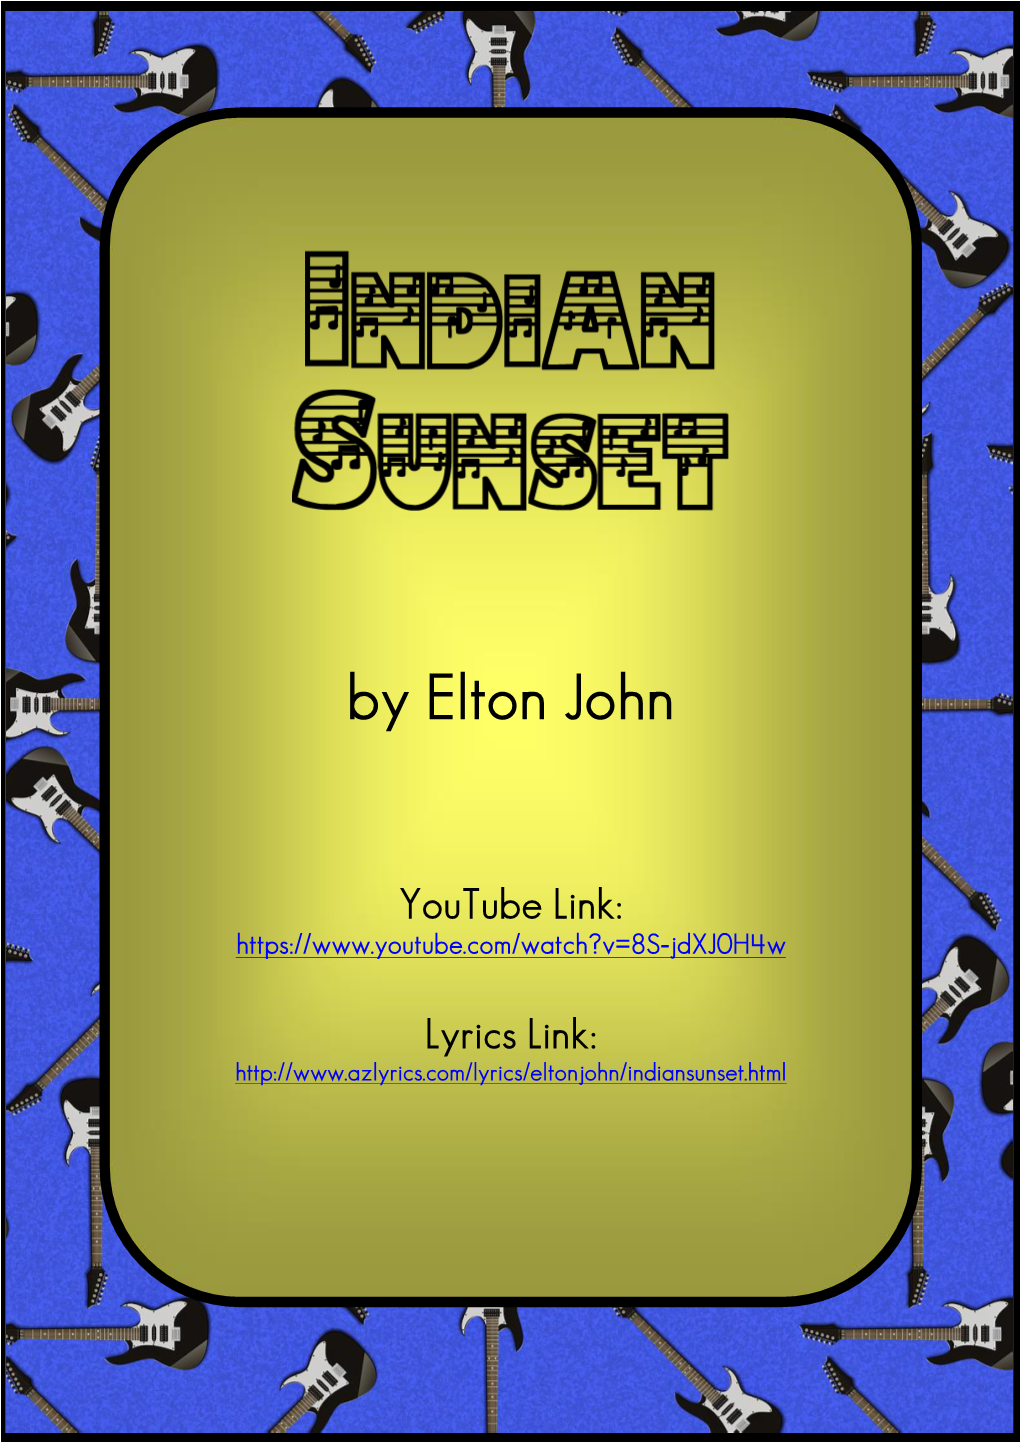 Indian Sunset by Elton John Name(S):______(RR) Retrieval and Recording Date: ______